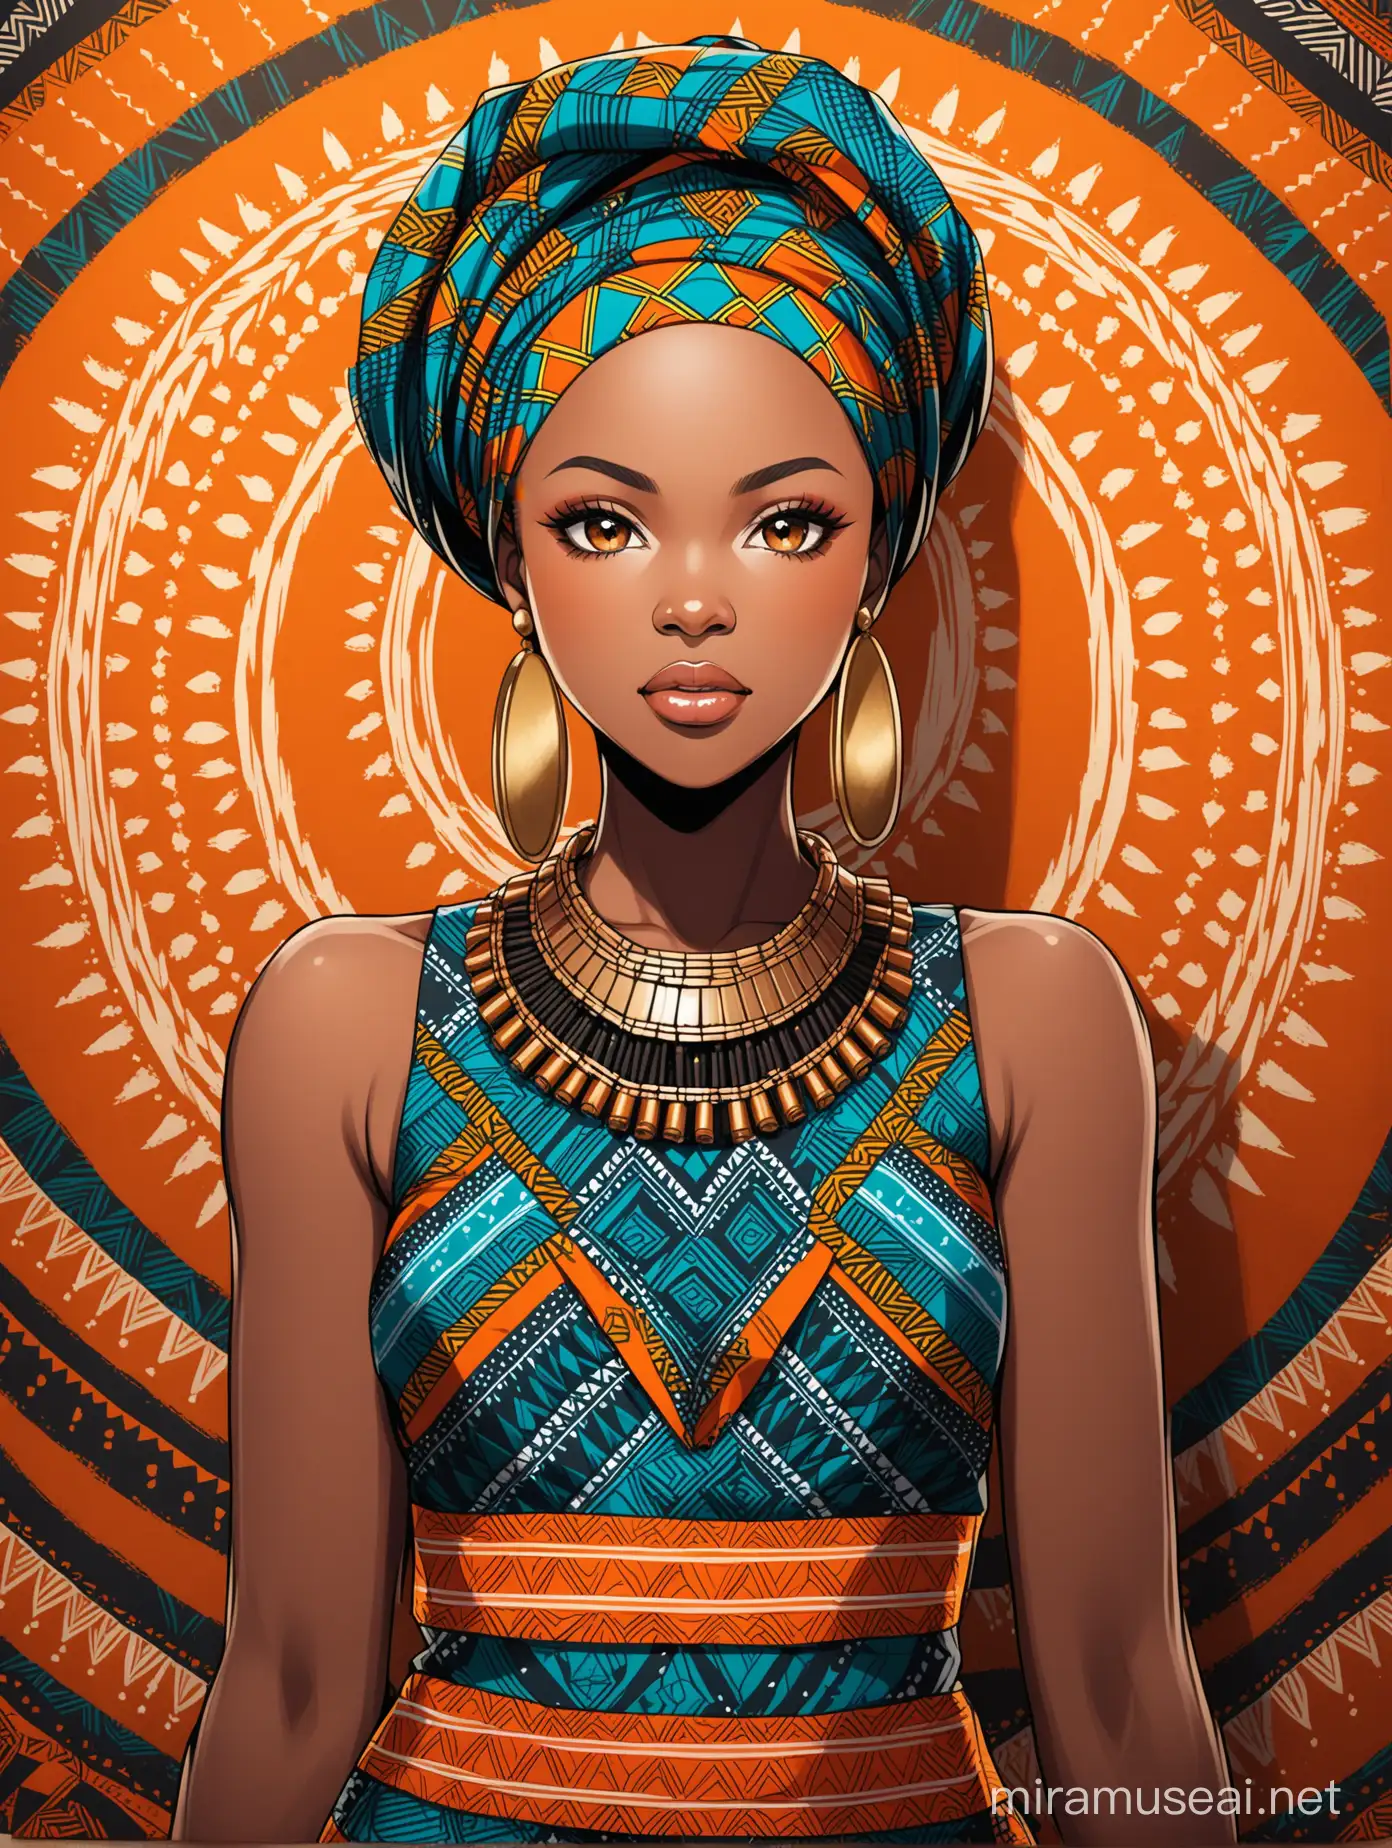 A high-quality photograph of a black woman wearing traditional African attire, such as a vibrant Ankara print dress or headwrap with patterns inspired by African tribal art as background elements.